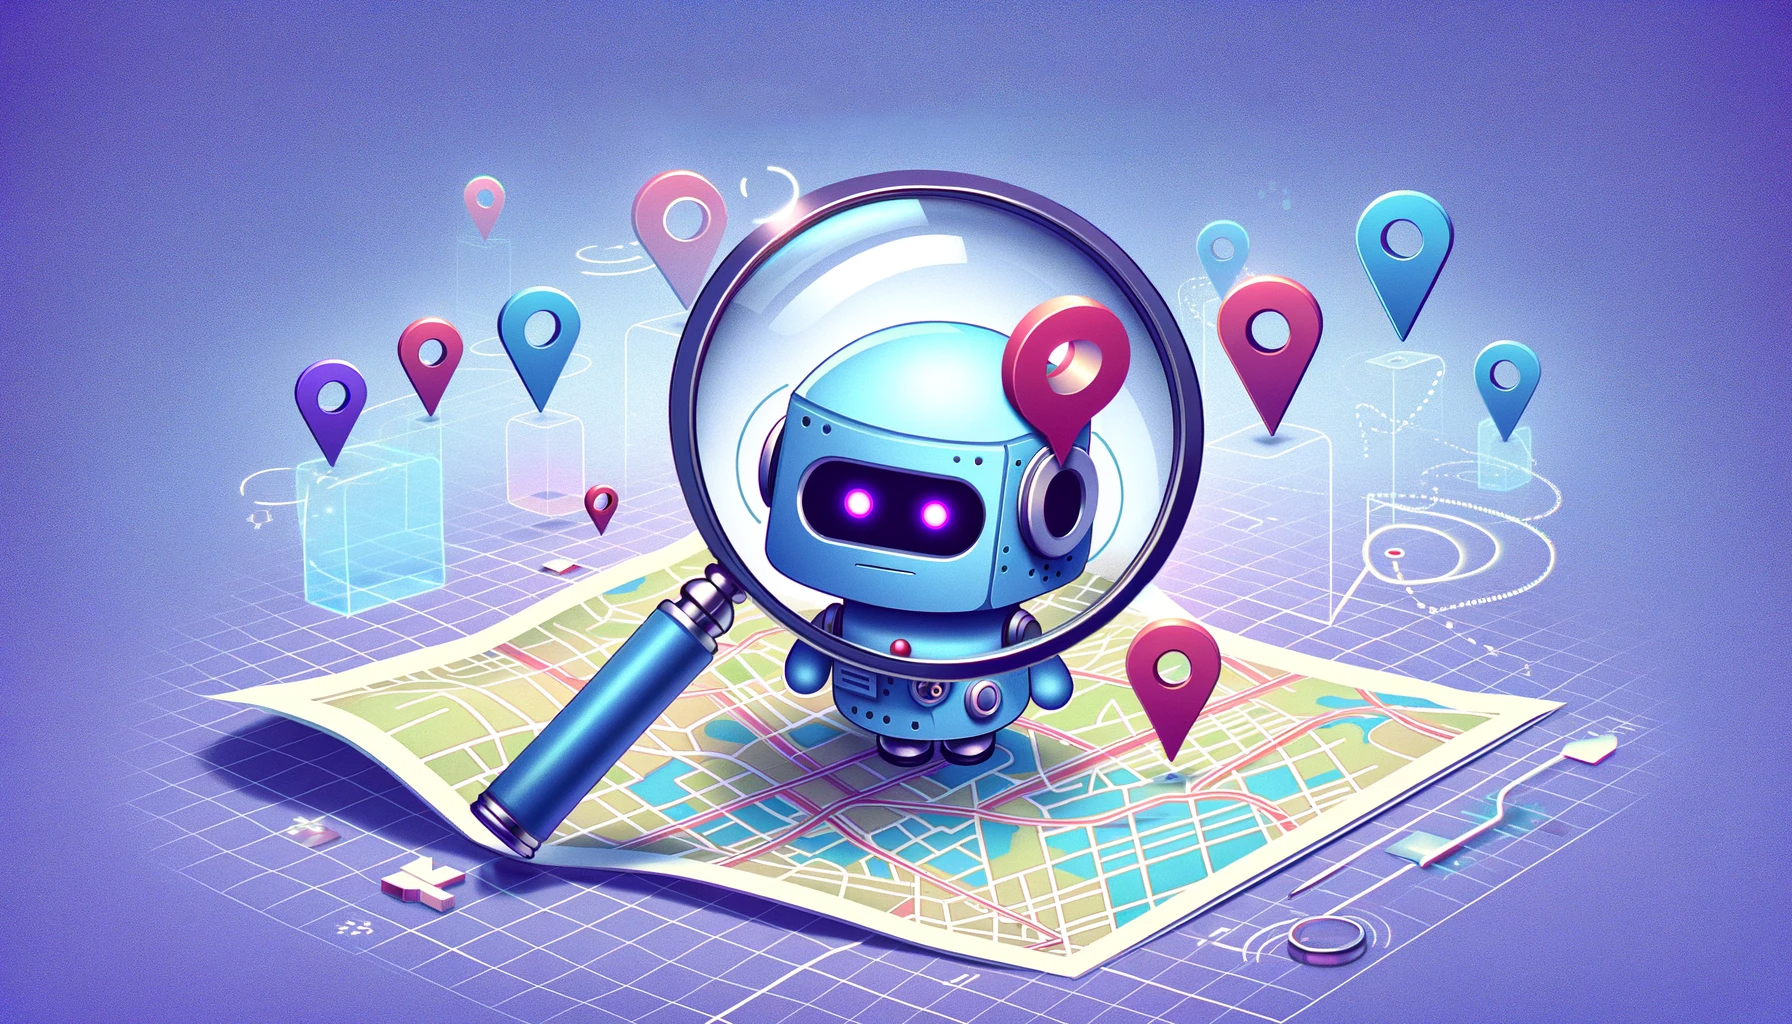 zkLocus offers authenticated geolocation without spoofing